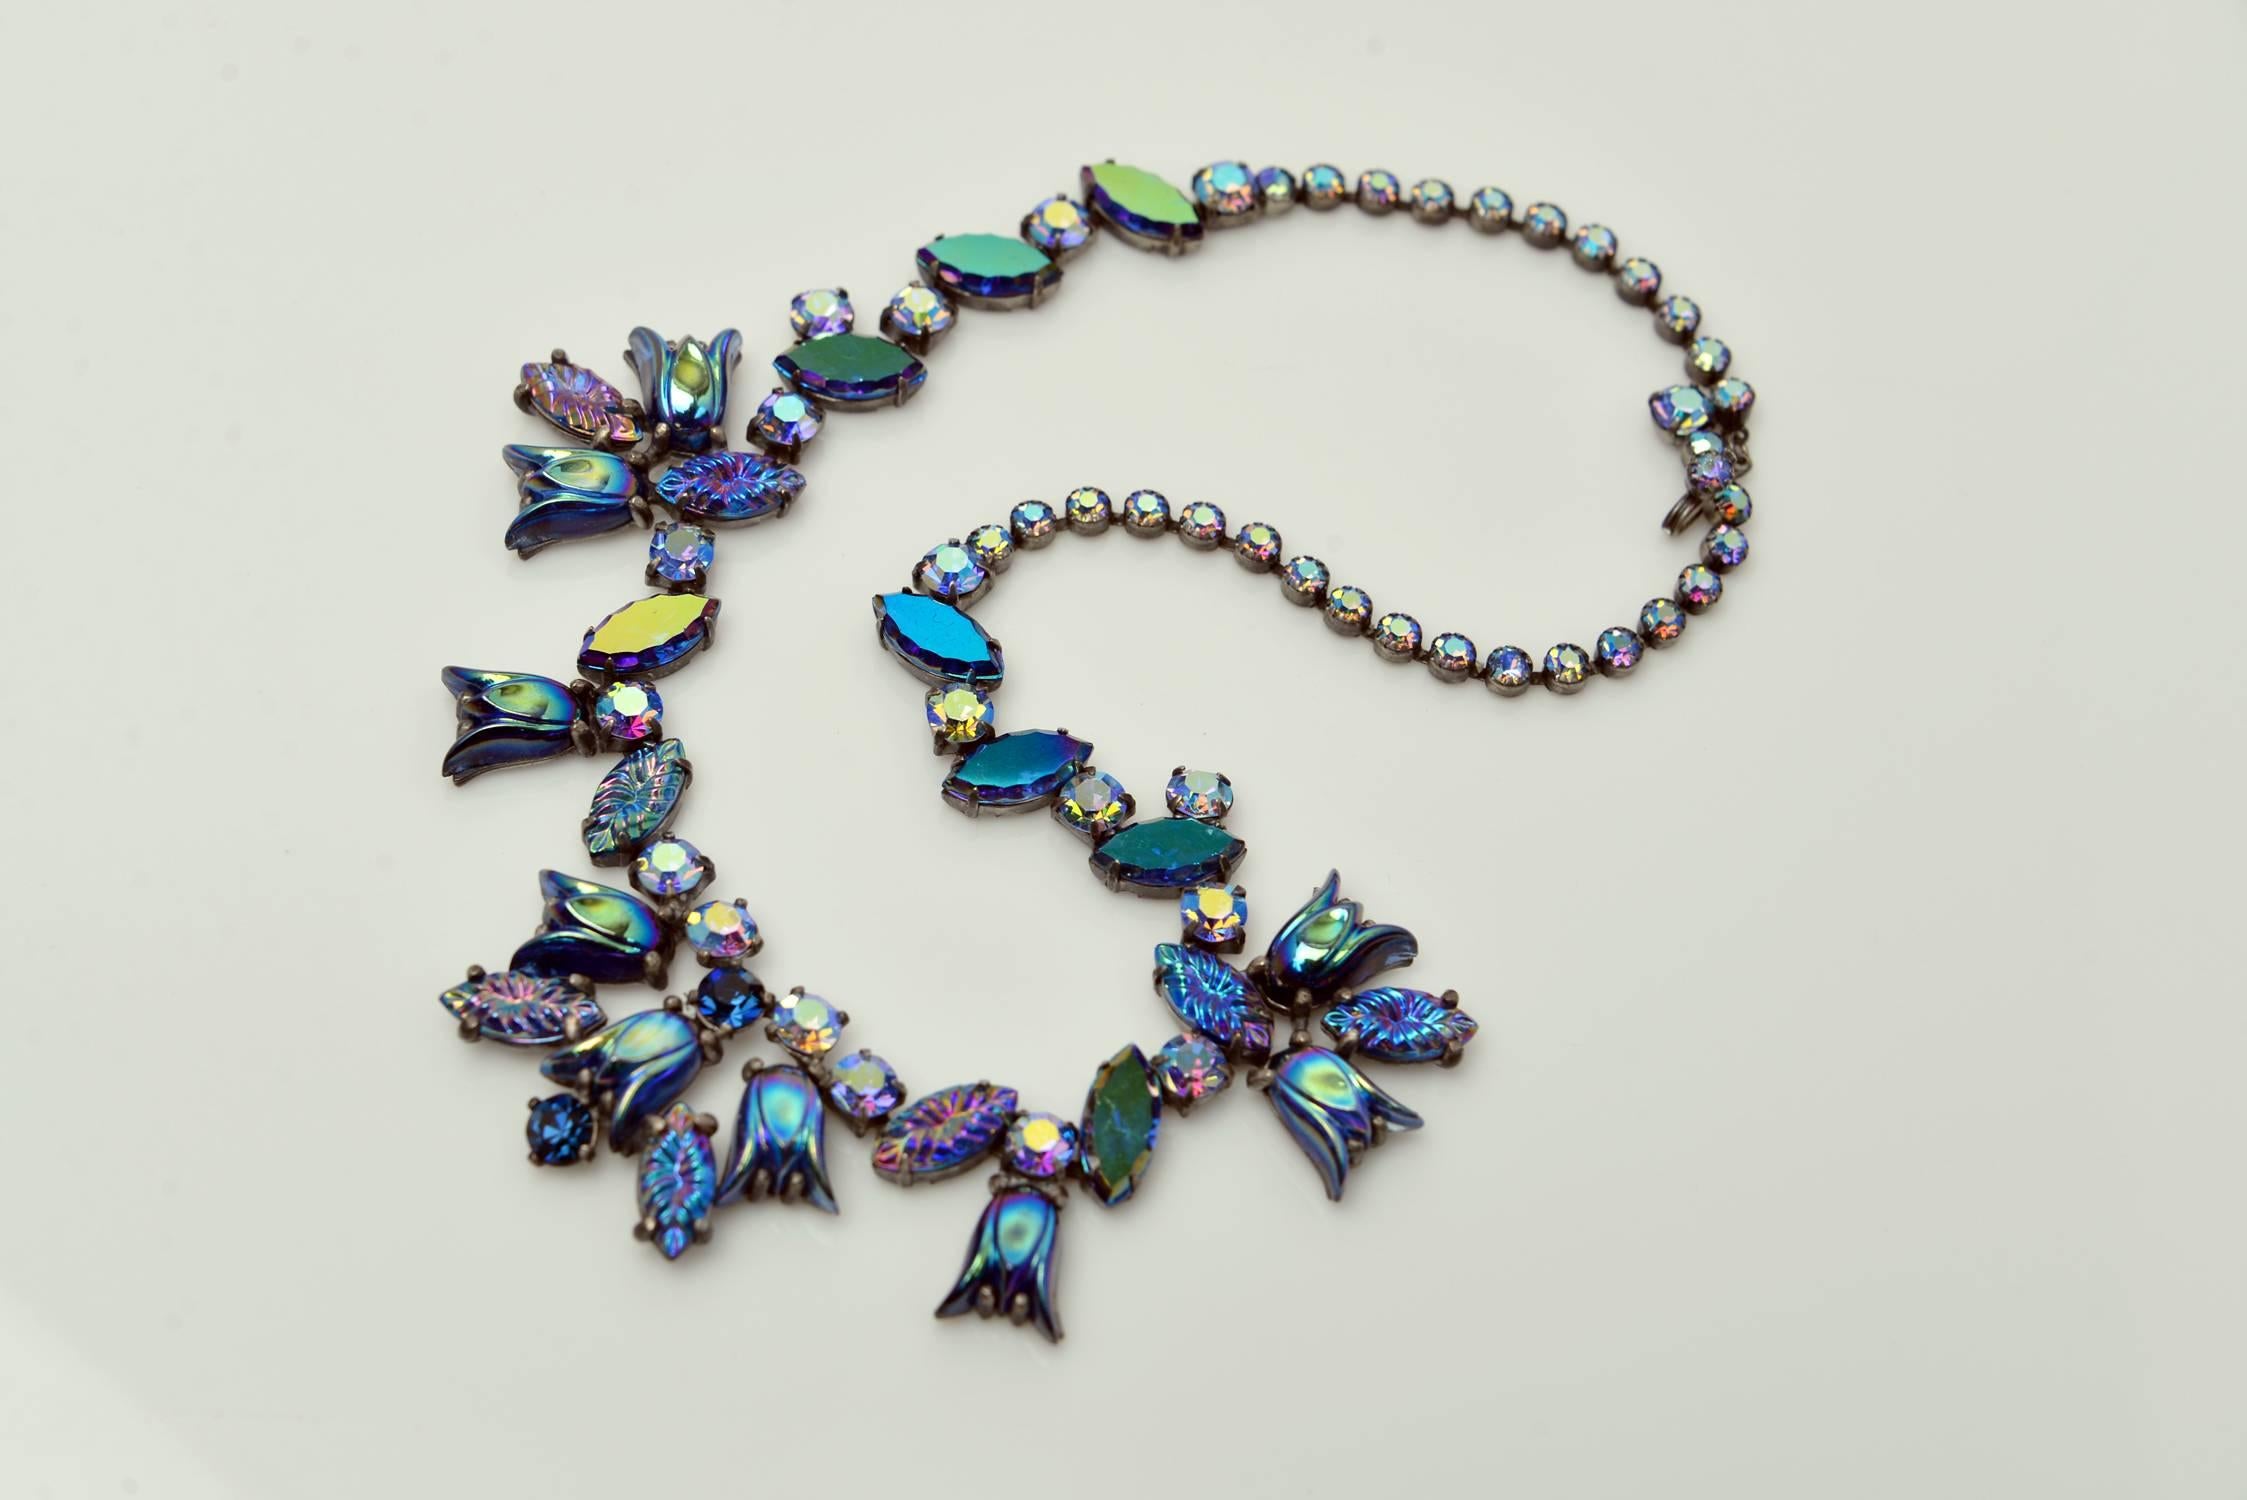 Beautiful vintage art glass and rhinestone necklace by Elsa Schiaparelli. The necklace features amazing iridescent icy blue “lava rock” and iridescent art glass stones, beautiful iridescent flashed carnival-glass like cabochons, and dazzling light